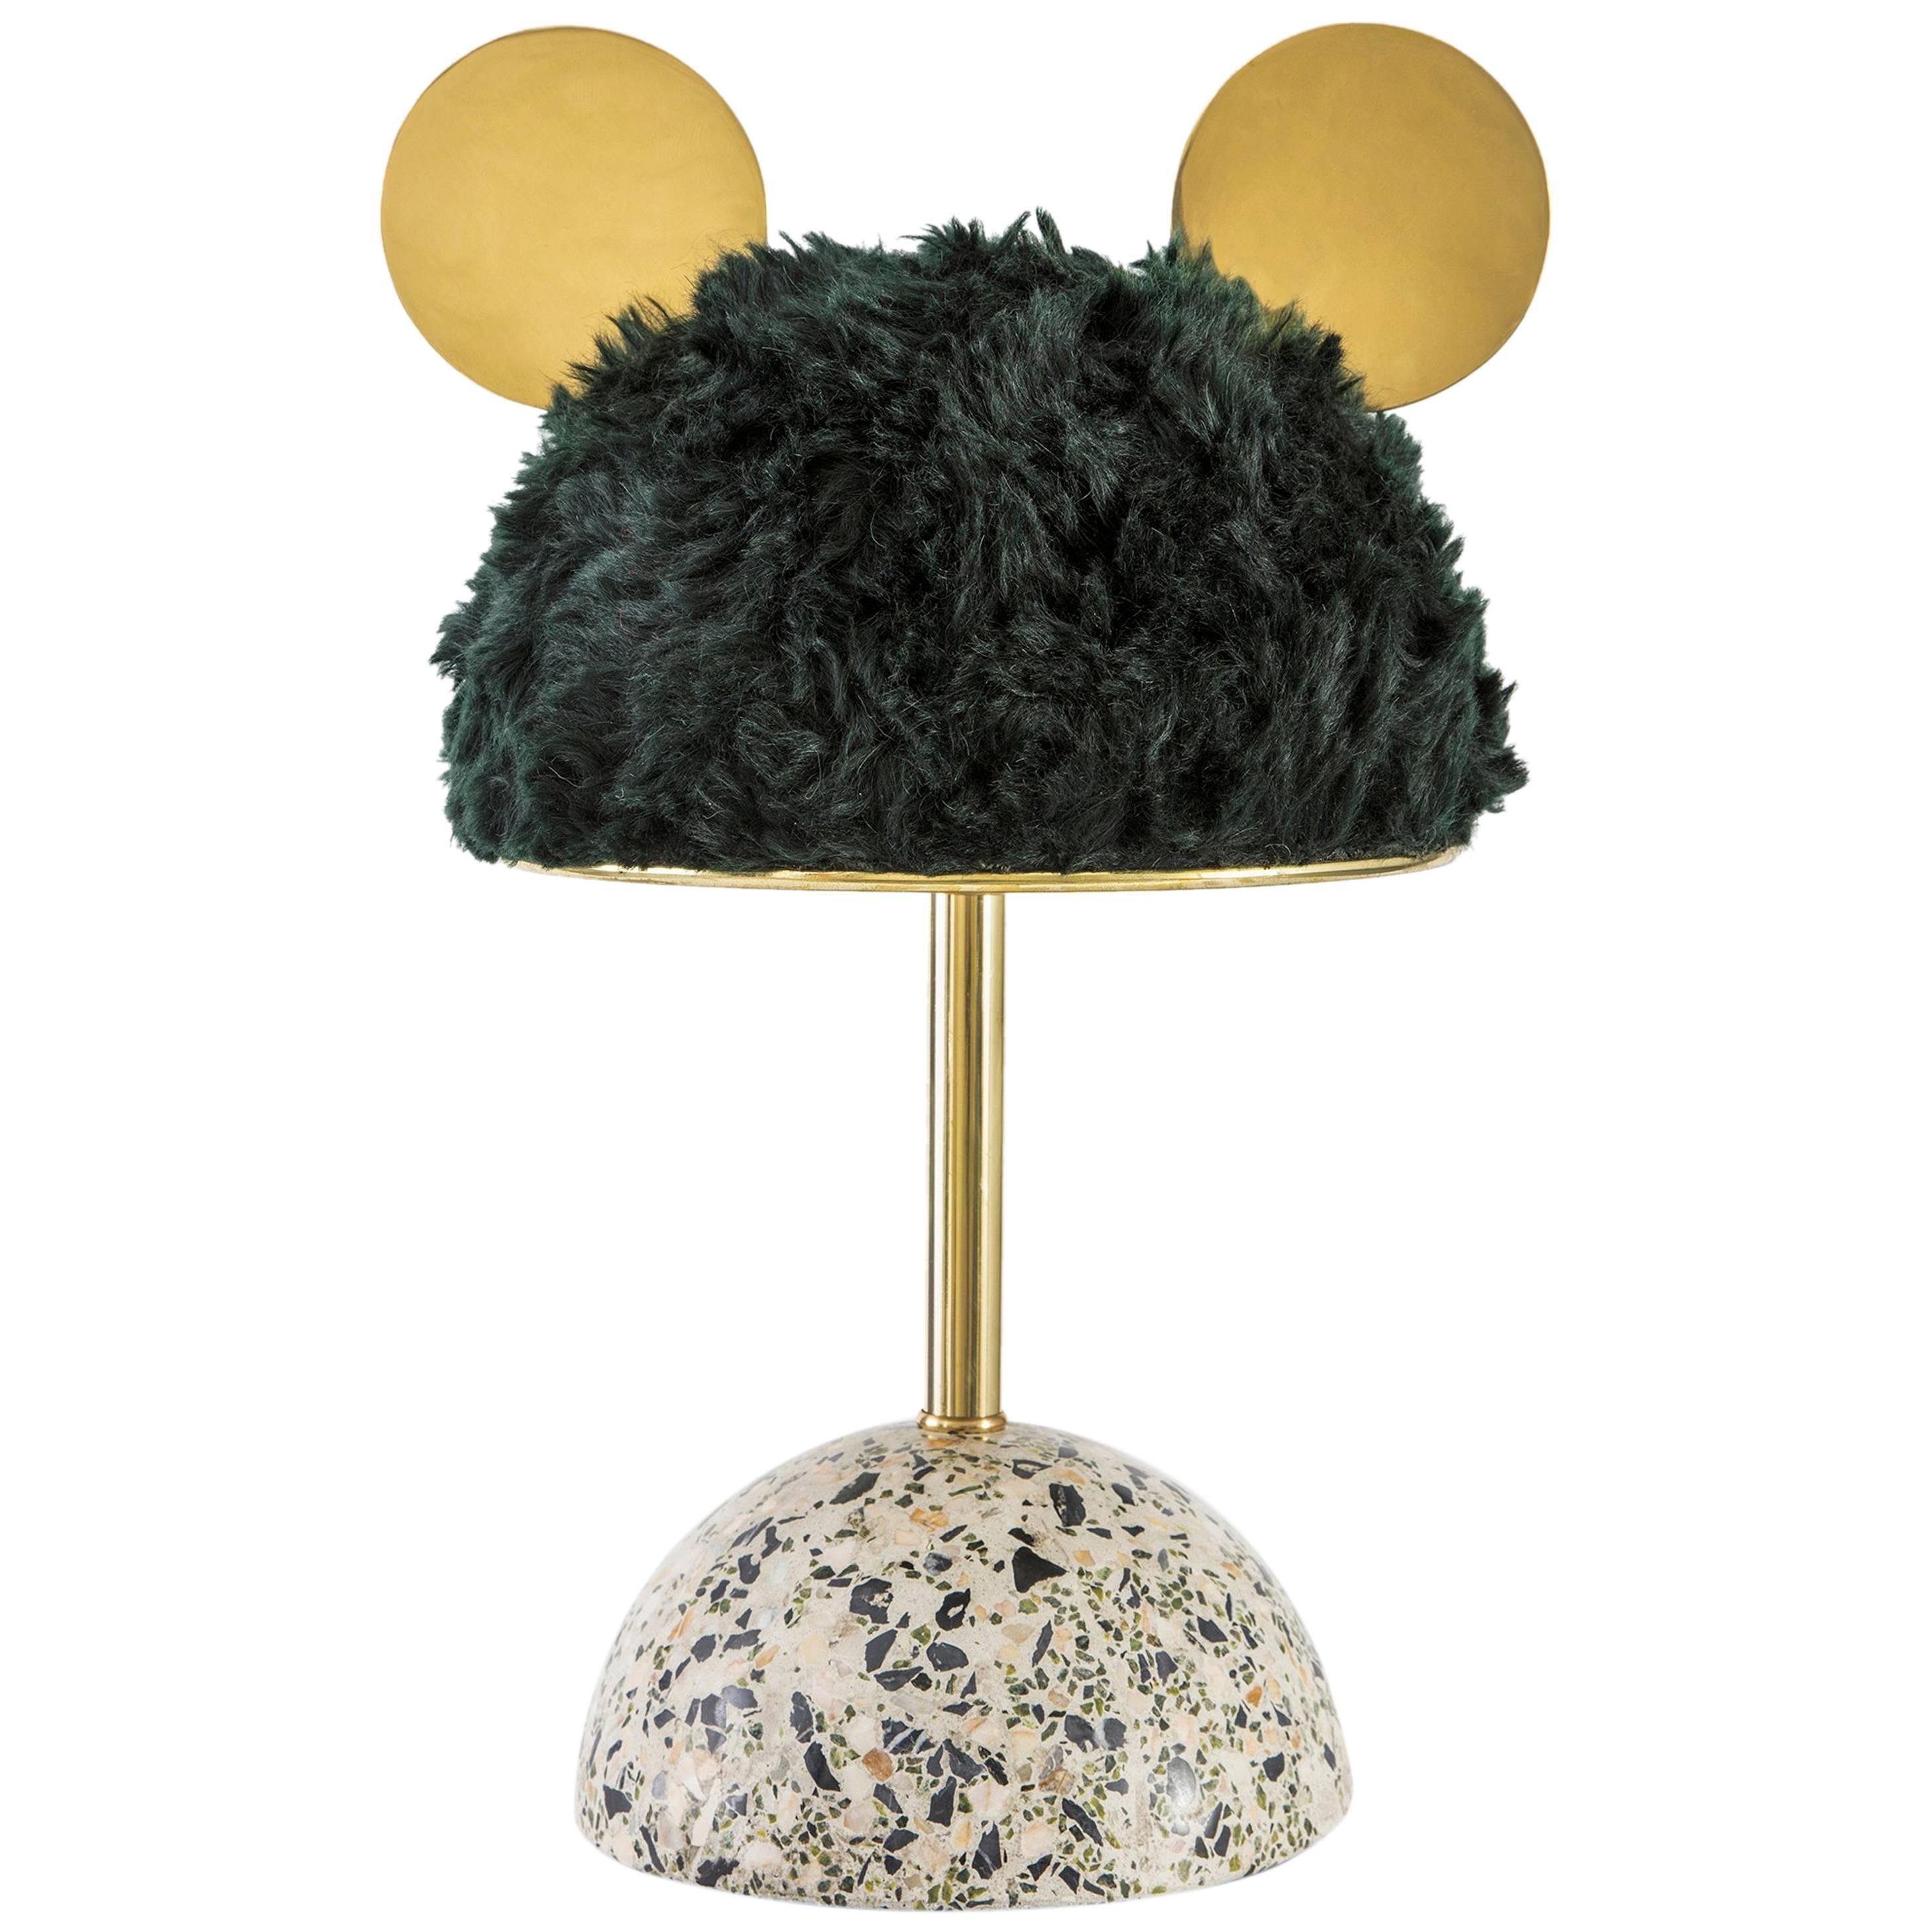 21st Century Minos Table Lamp in Green Mohair, Terrazzo and Polished Brass For Sale